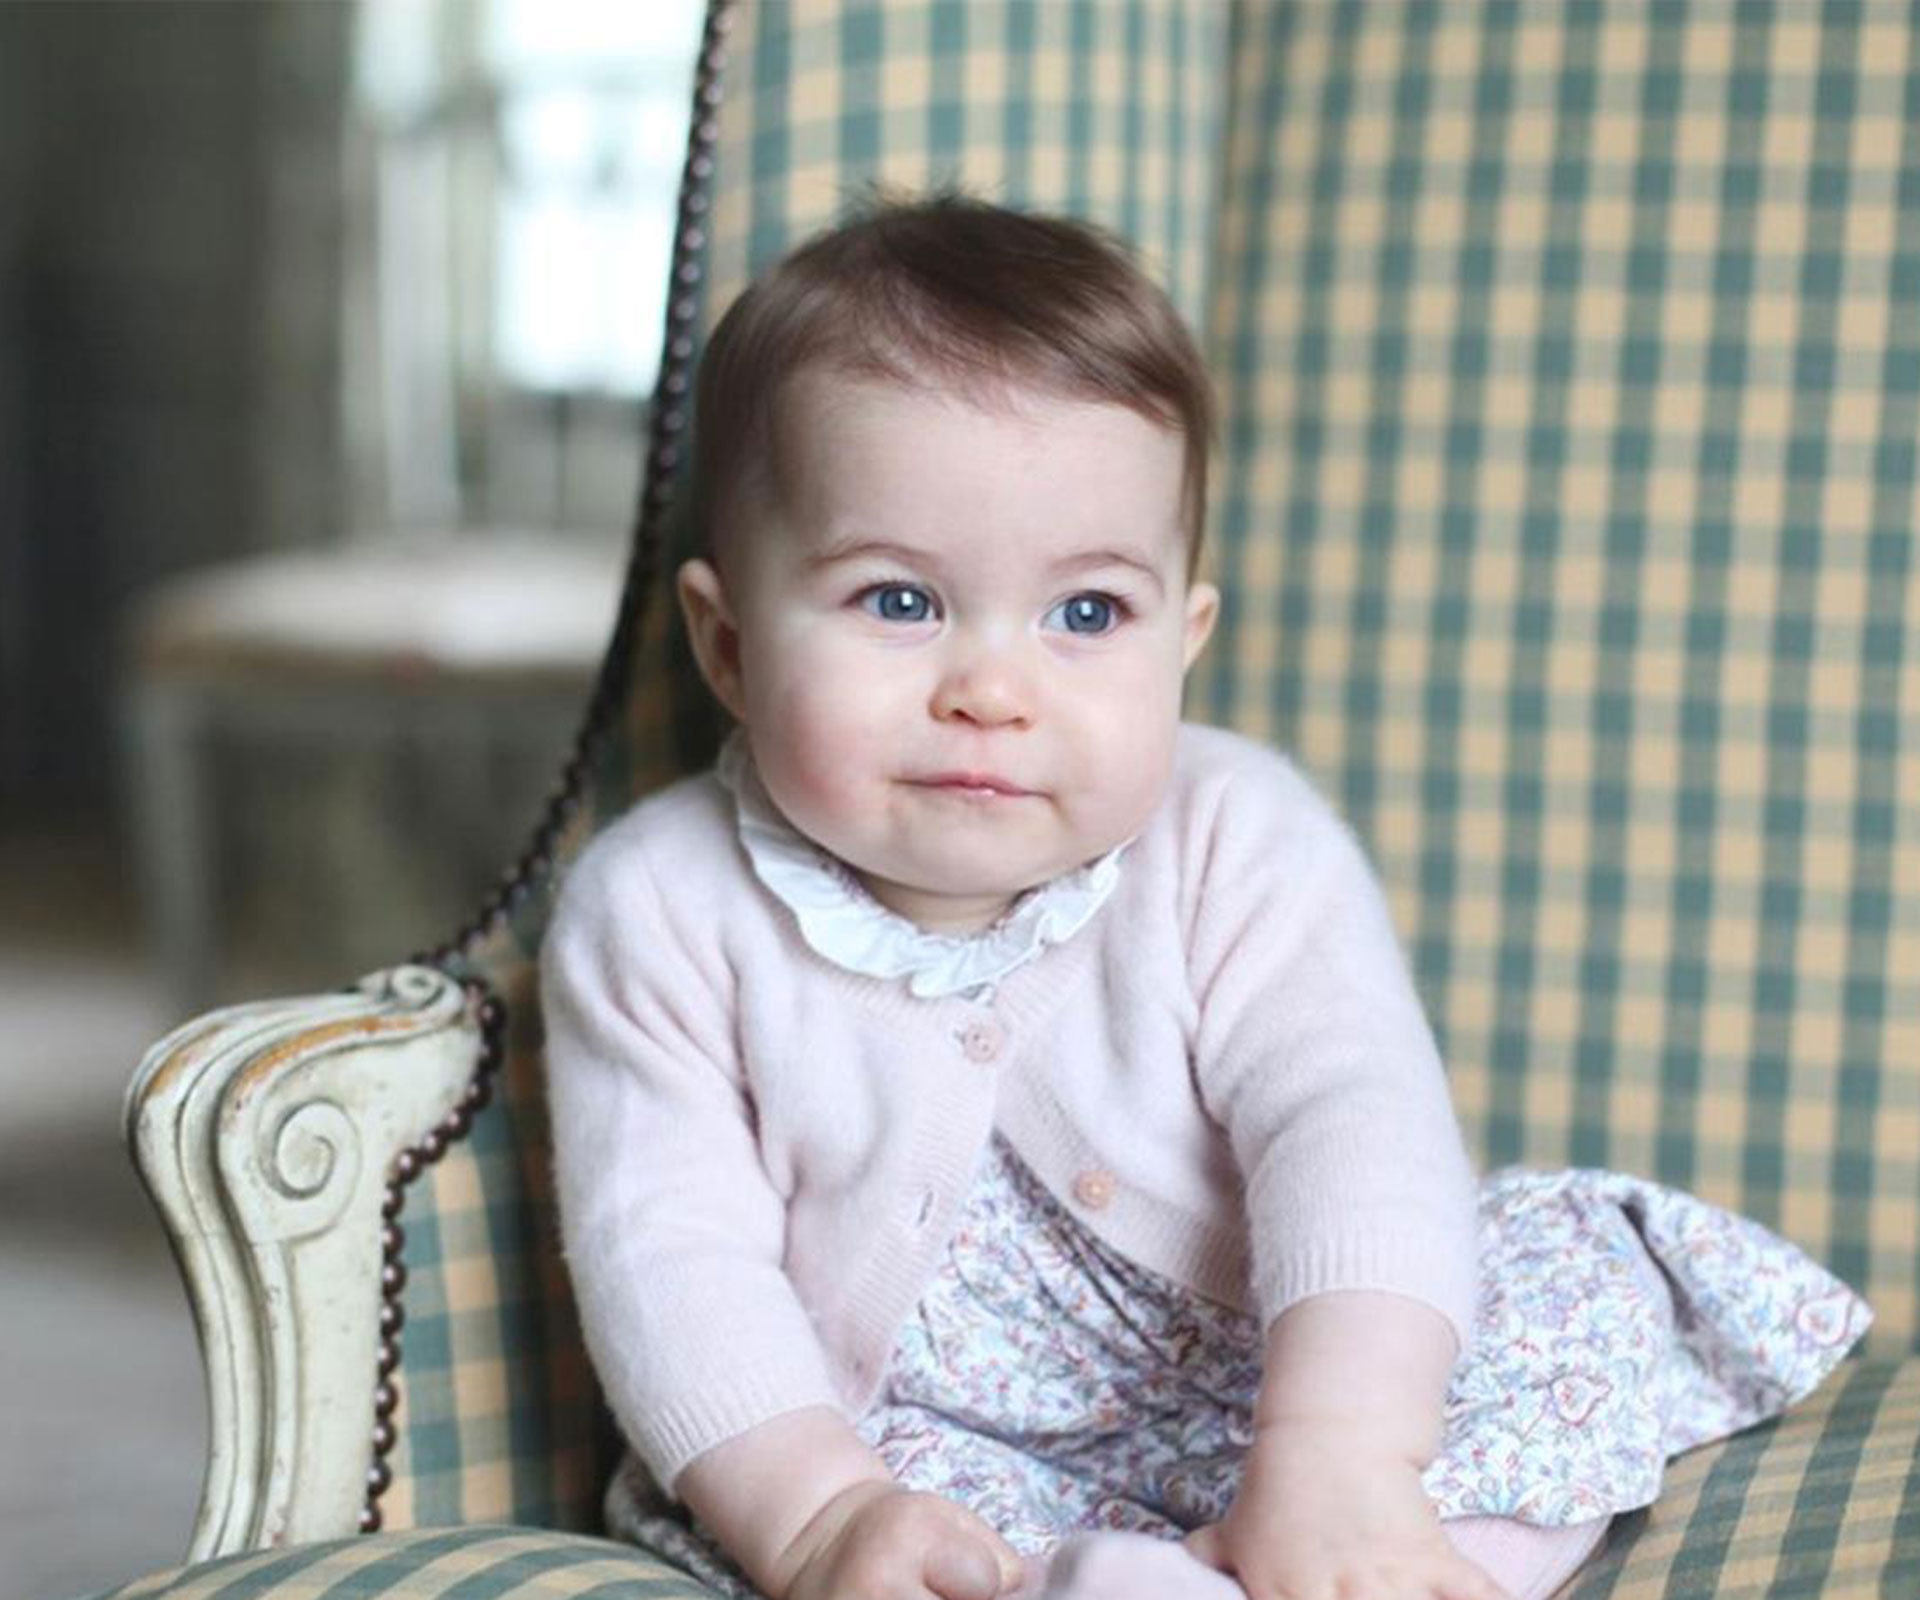 Prince William: ‘Charlotte is so easy and sweet!’